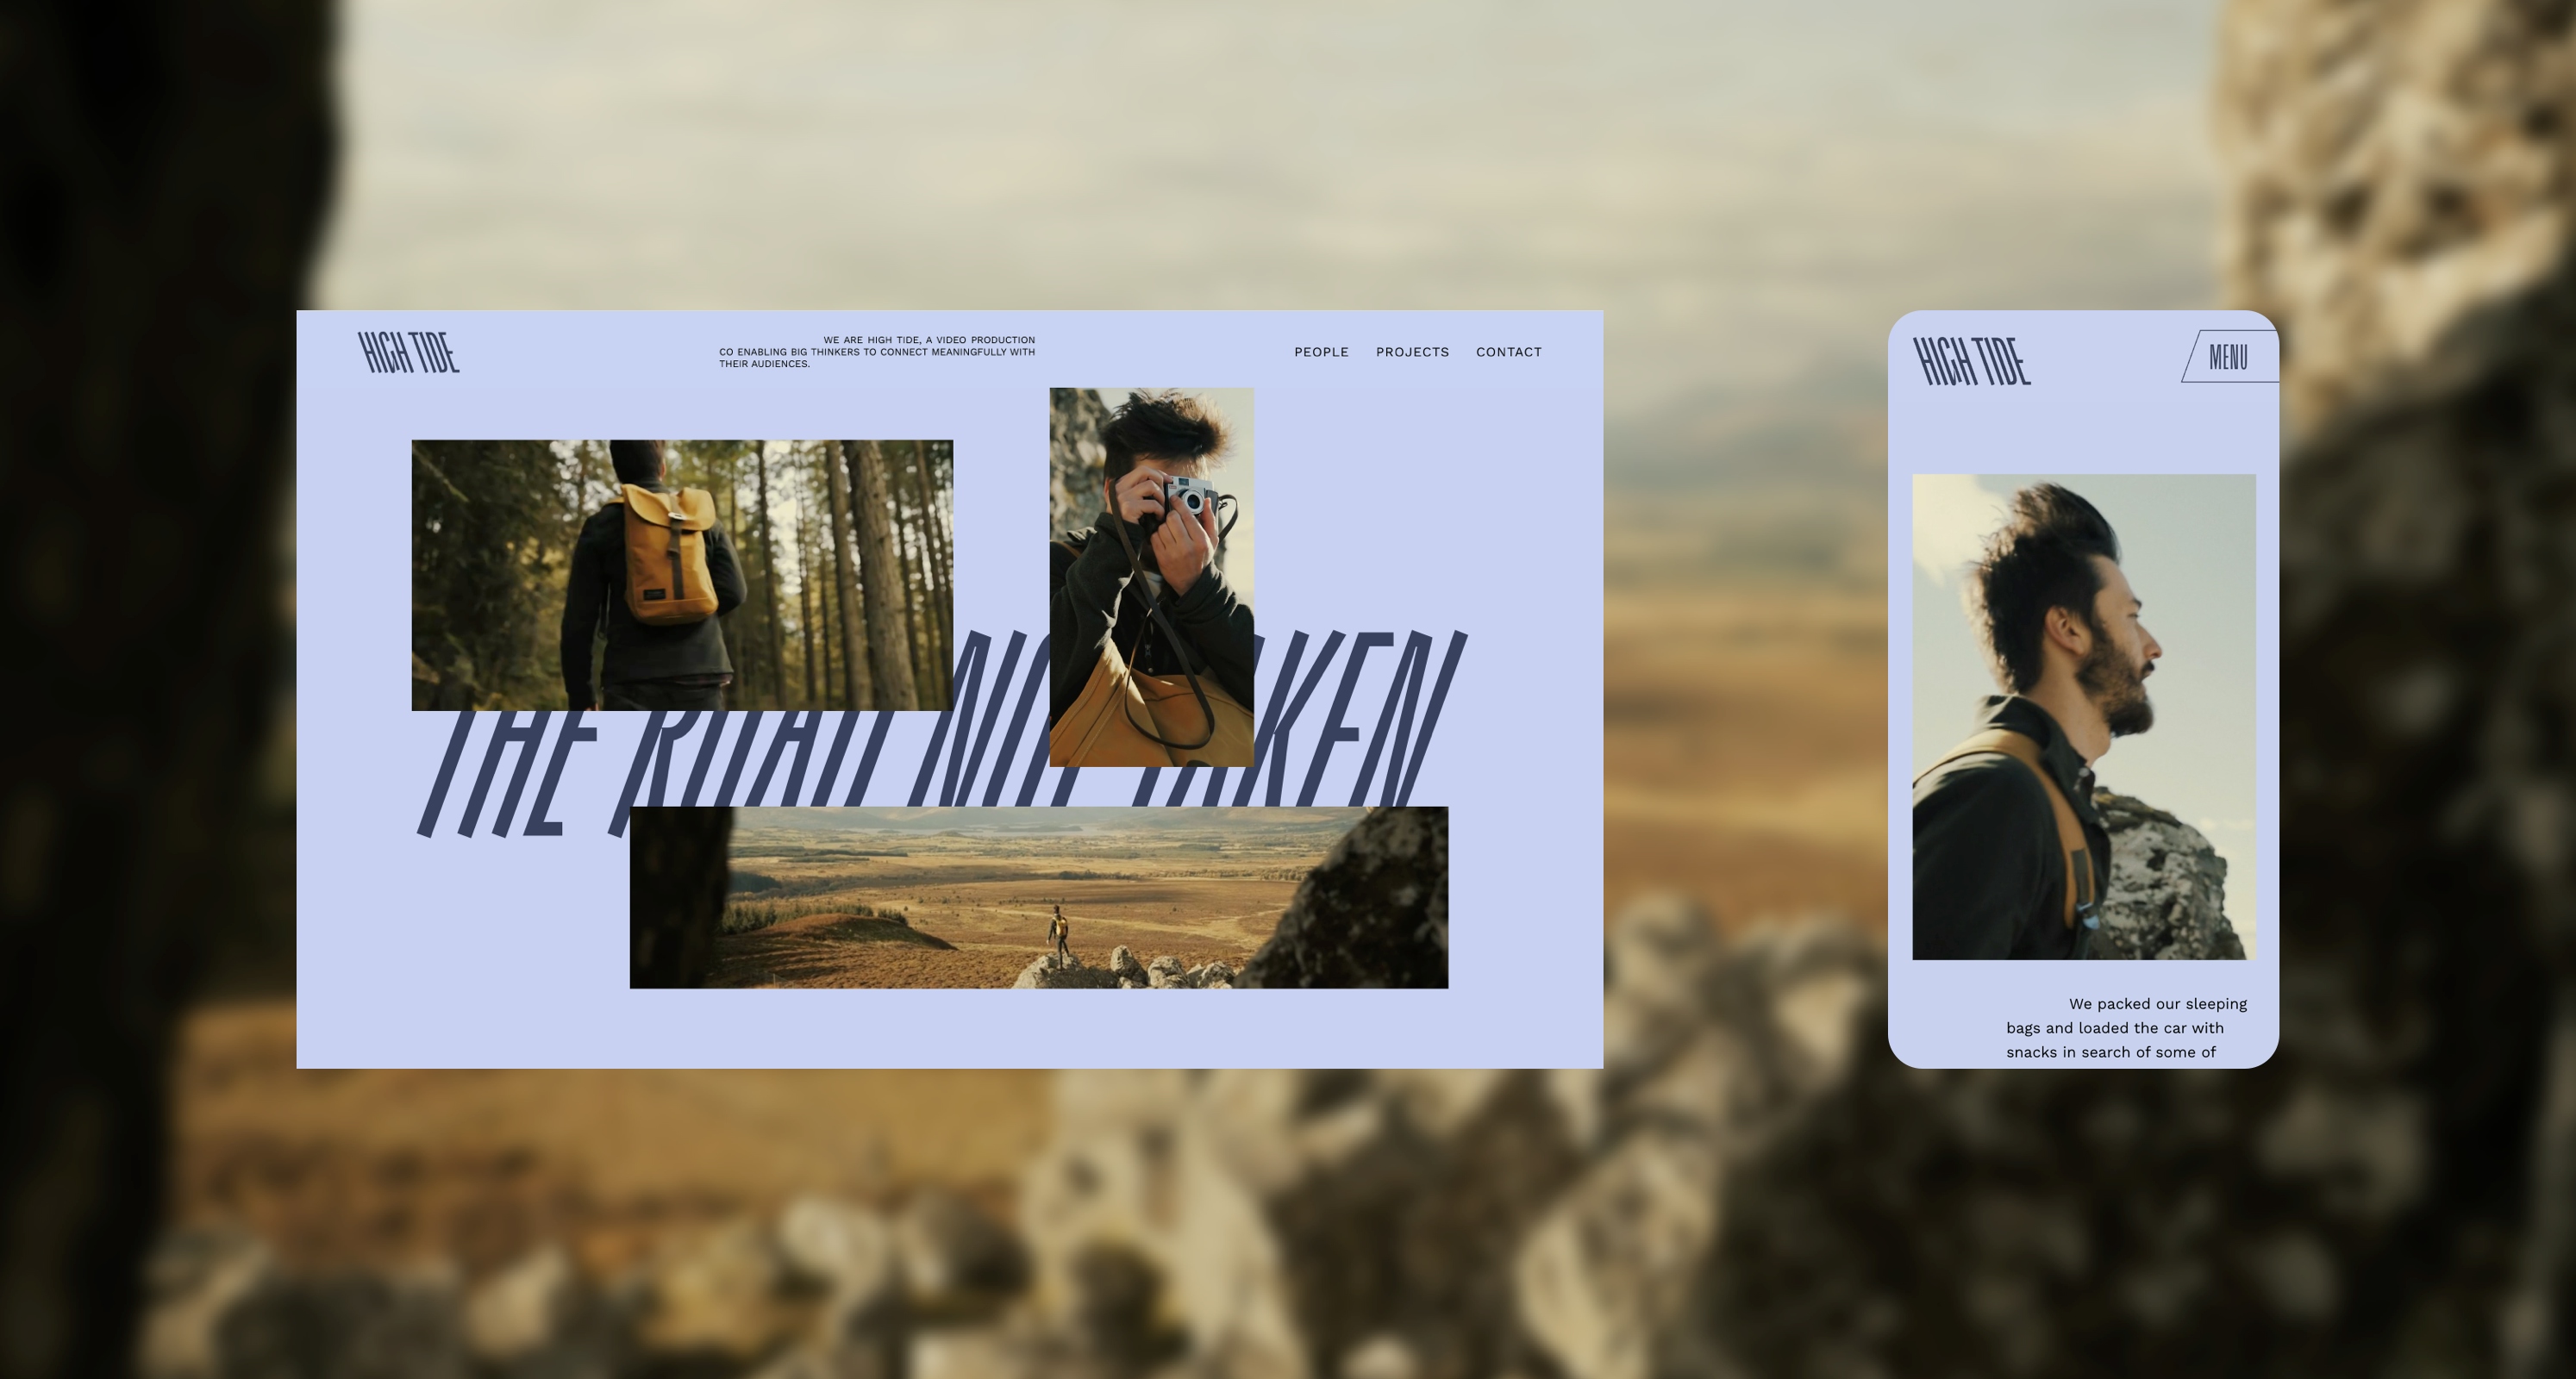 A blurry image of a rocky landscape has two screens superimposed on it. The first is a landscape, lilac, web page which has purple text “The road not taken” and three images overlay this: a man walking away in a forest, a man taking a photo and a panorama of landscape between rocks. The second image is a lilac mobile screen with an image of a windswept bearded person in profile and illustrative text.